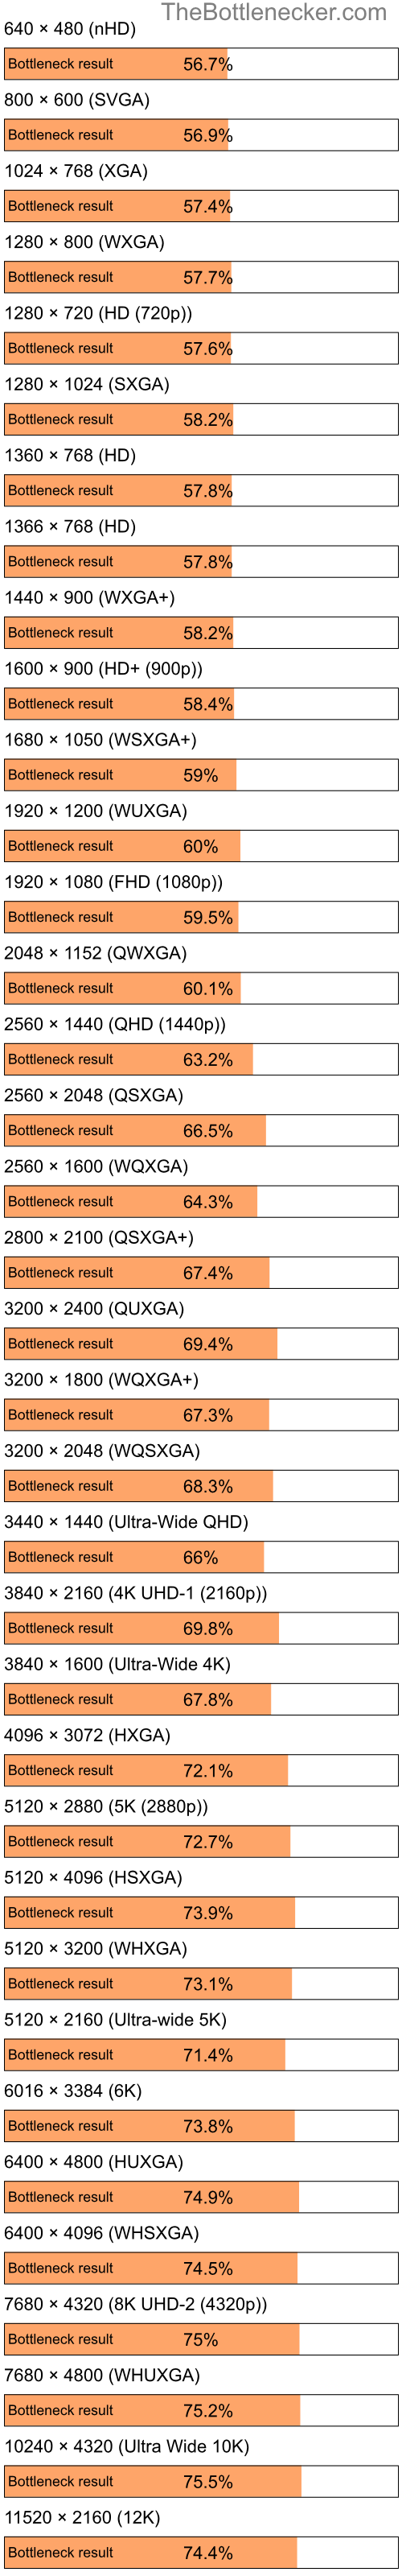 Bottleneck results by resolution for Intel Pentium 4 and NVIDIA Quadro FX 370 in Processor Intense Tasks